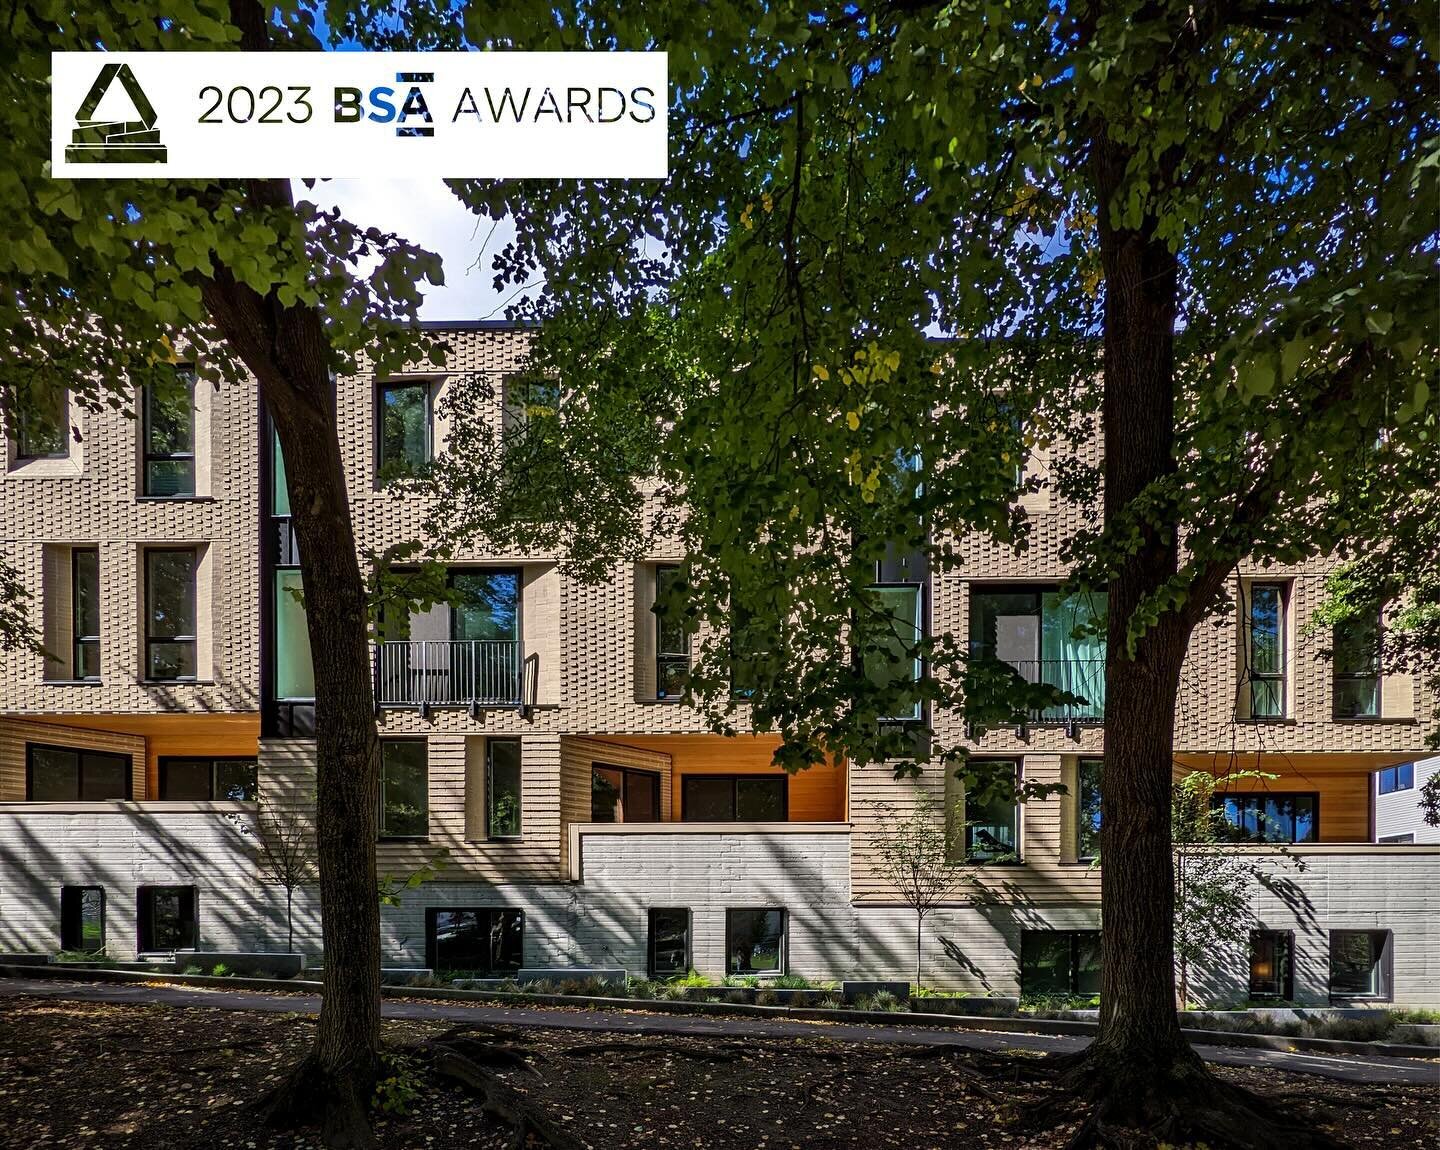 Our 199 Boylston Street Residences project was awarded a Social, Technical, and Environmental Impact Advancement Commendation in Housing at the 2023 BSA Awards Gala last night! Thank you to the @bsaaia for hosting this wonderful event. We would also 